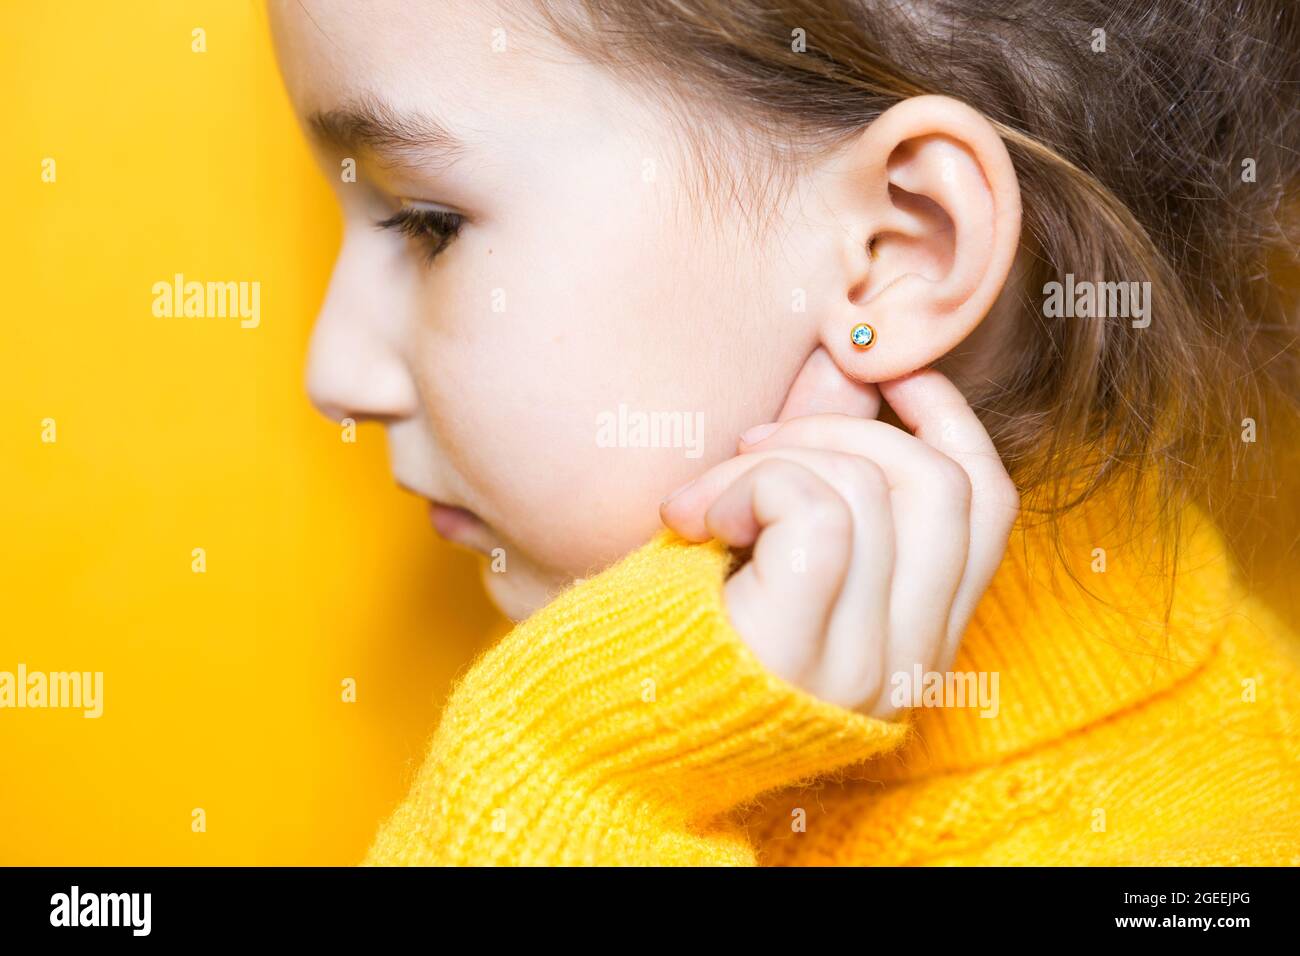 How To Choose The Right Type Of Huggie Earrings For Kids